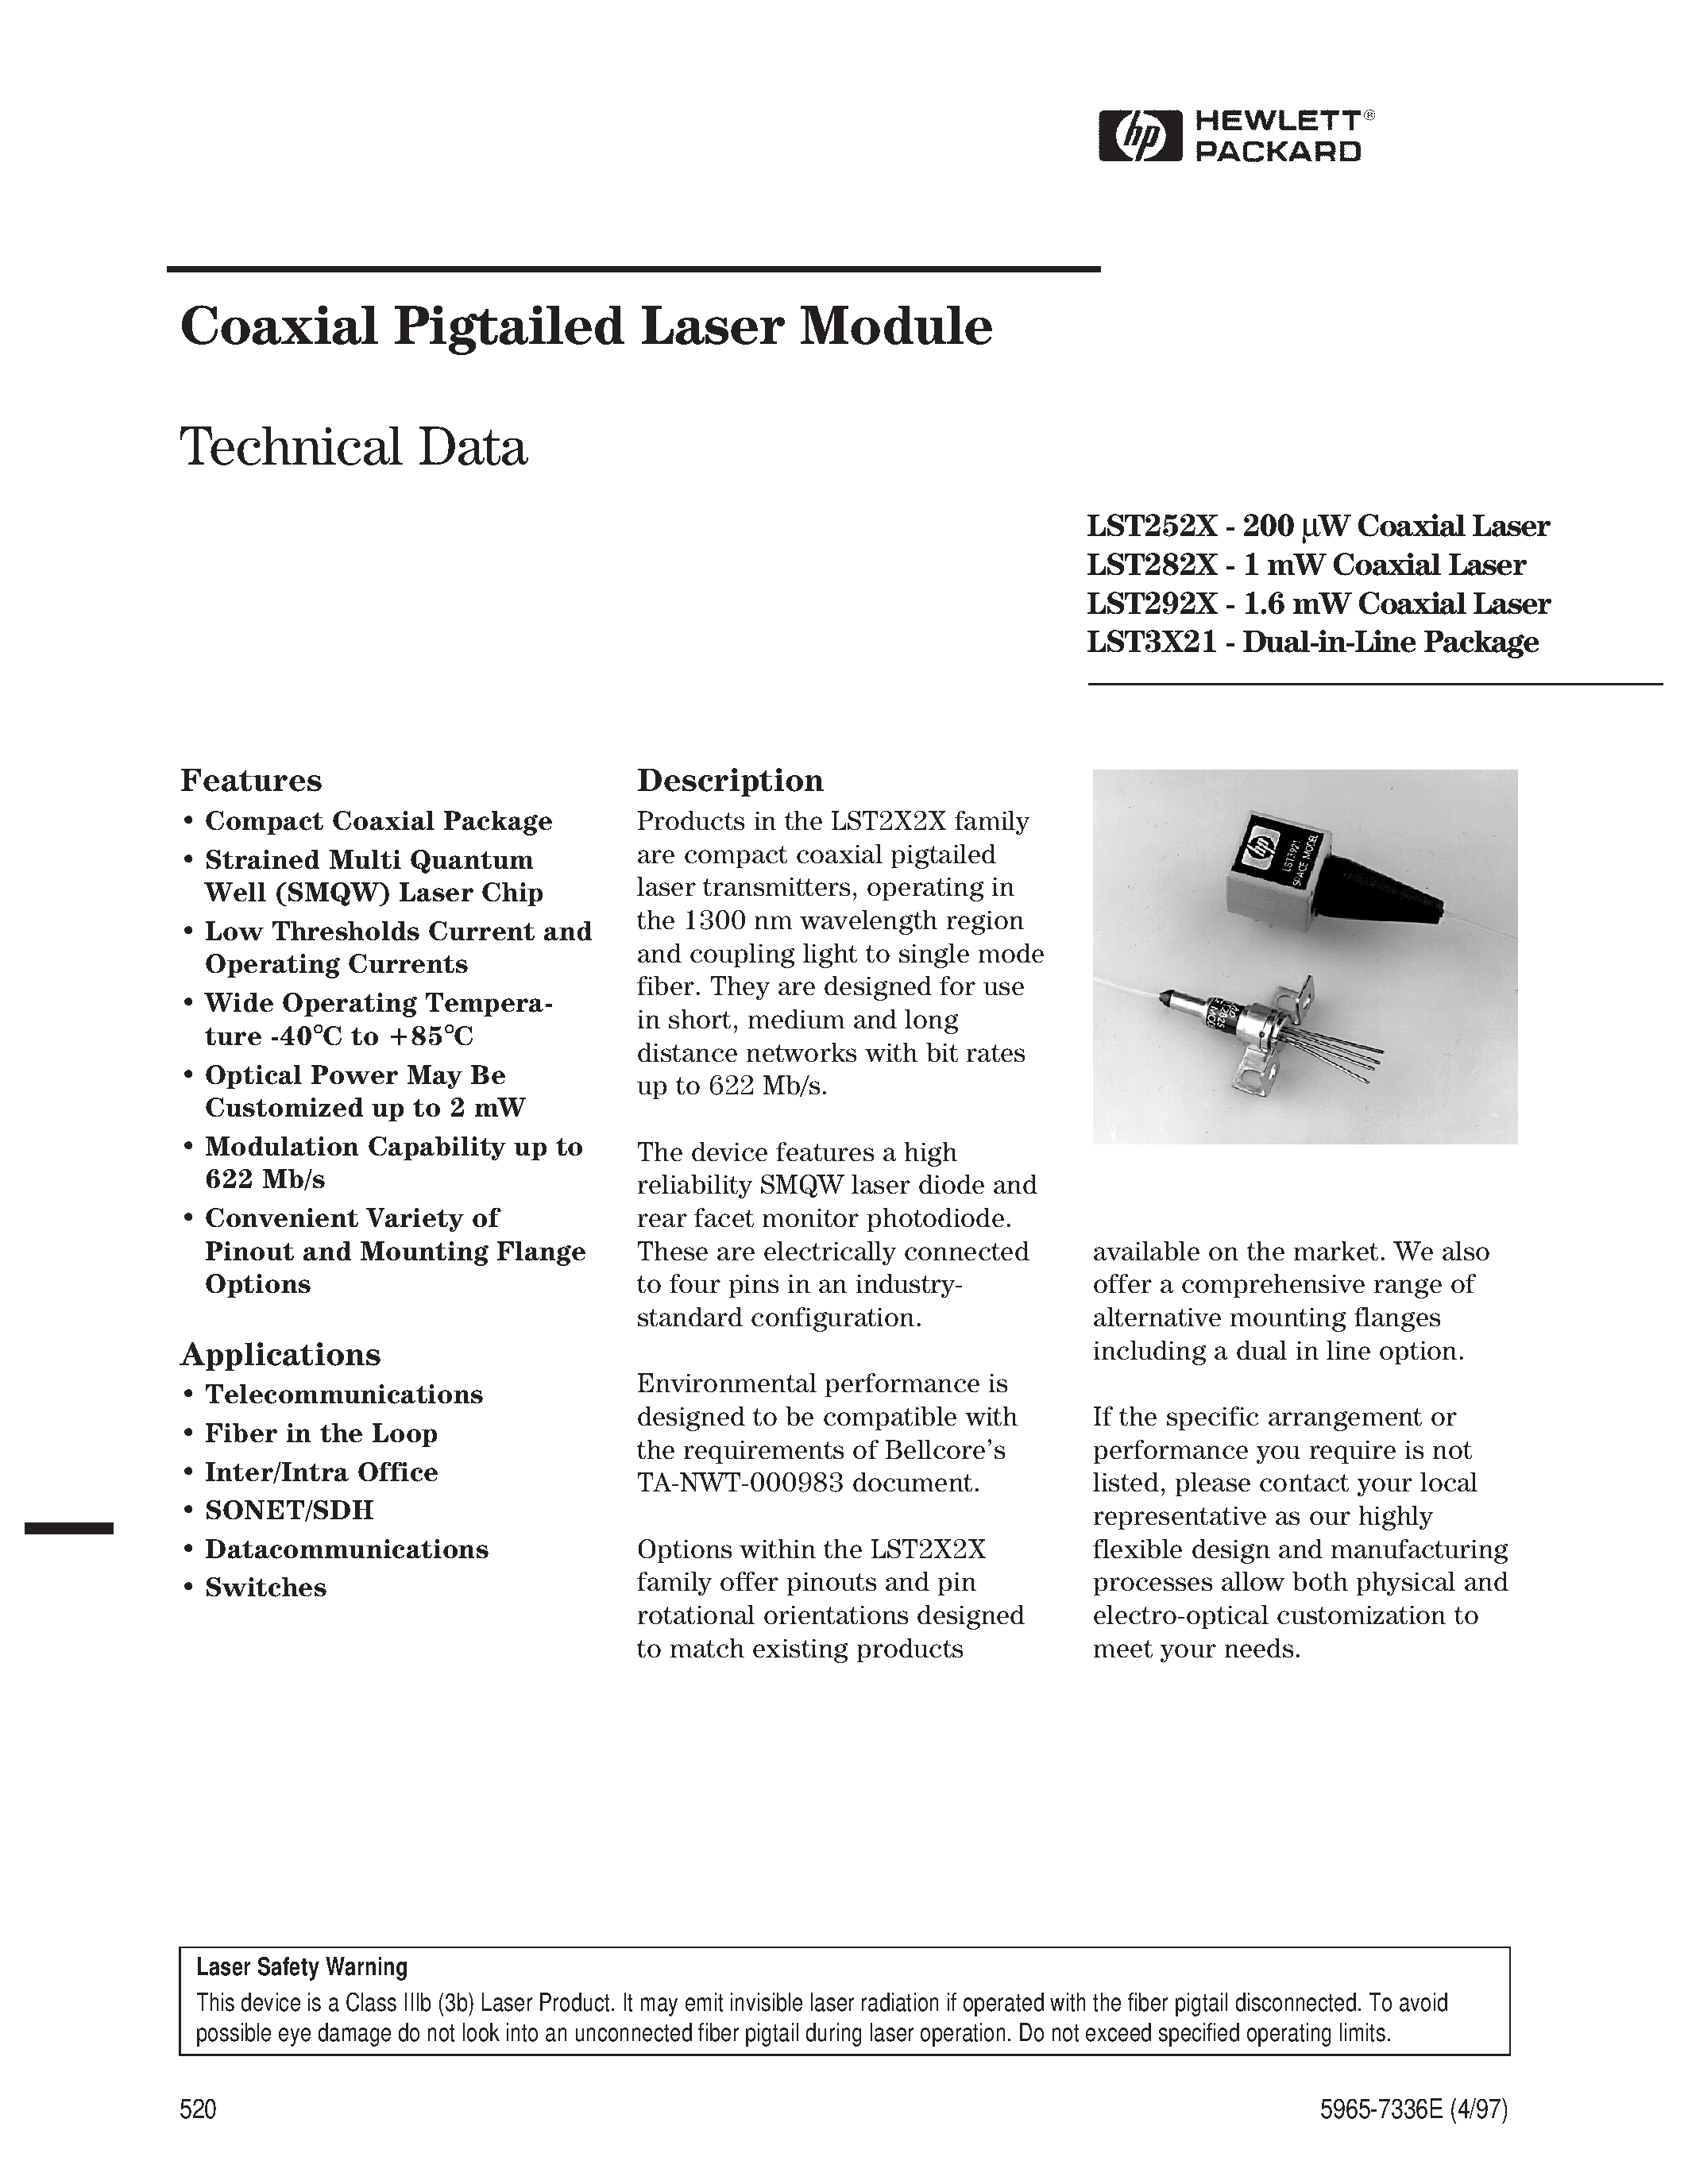 Datasheet LST2925-S4-B-ST - Coaxial Pigtailed Laser Module page 1